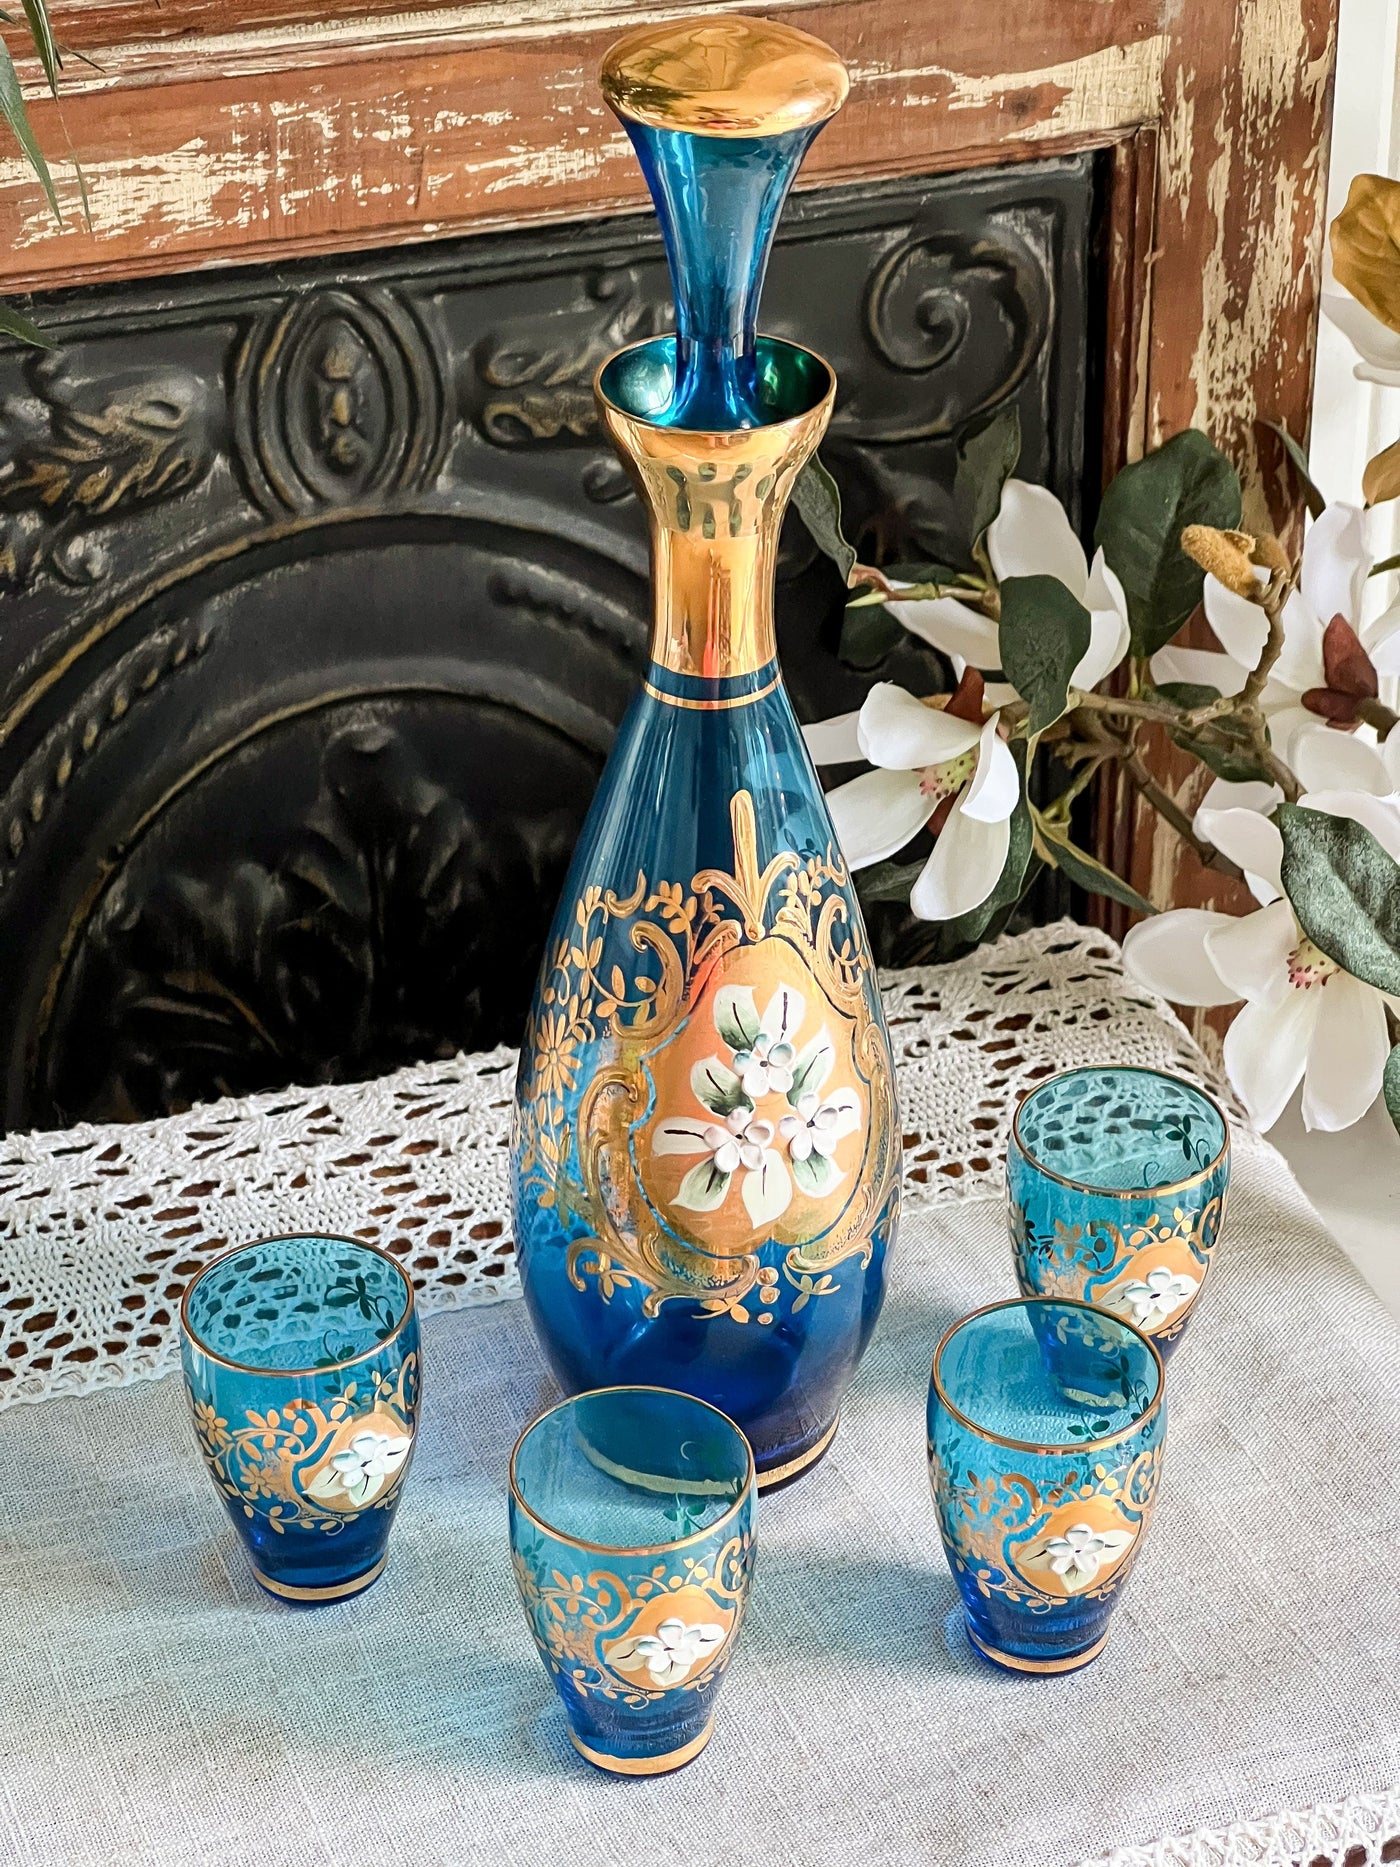 BLUE & GOLD WITH PAINTED FLOWERS CZECH BOHEMIAN DECANTER WITH 6 GLASSES Revive In Style Vintage Furniture Painted Refinished Redesign Beautiful One of a Kind Artistic Antique Unique Home Decor Interior Design French Country Shabby Chic Cottage Farmhouse Grandmillenial Coastal Chalk Paint Metallic Glam Eclectic Quality Dovetailed Rustic Furniture Painter Pinterest Bedroom Living Room Entryway Kitchen Home Trends House Styles Decorating ideas